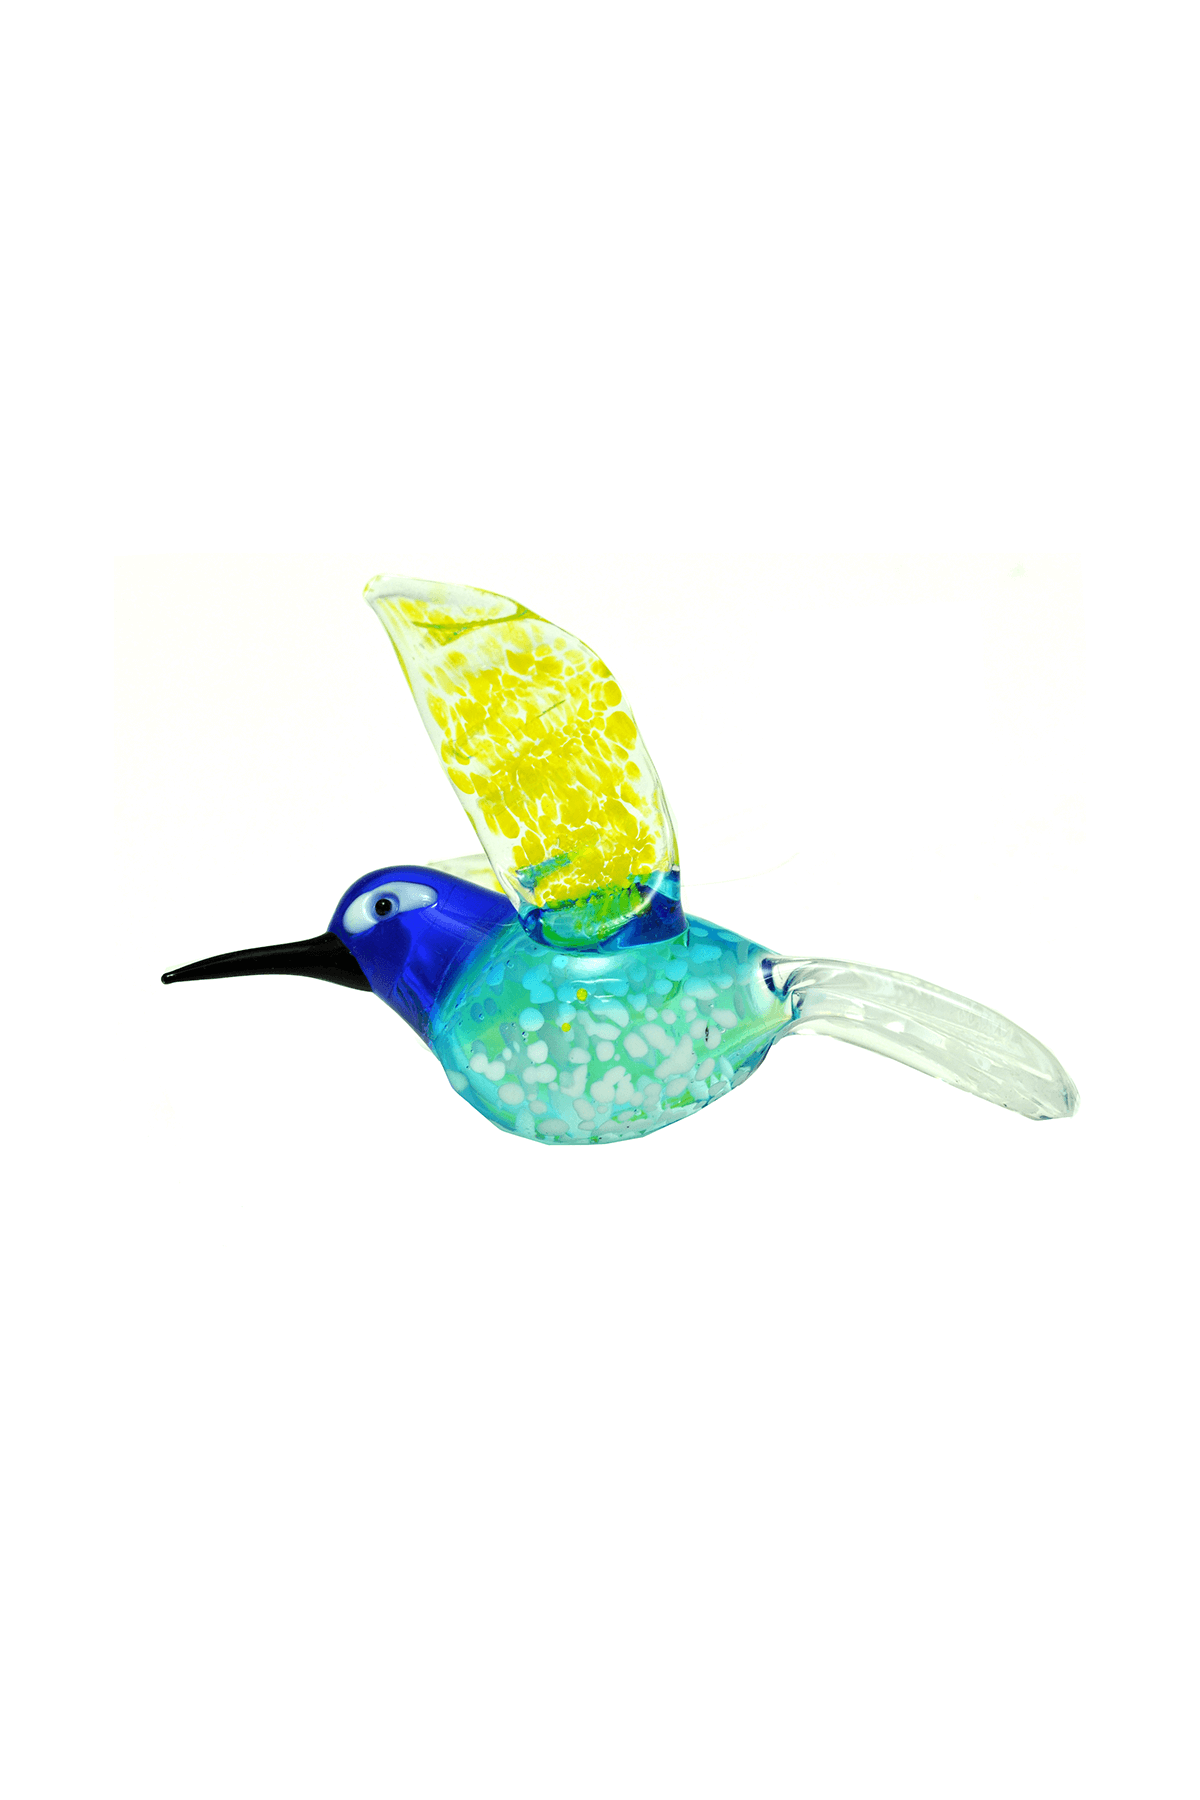 Crystal Castle Glass Hummingbird in Turquoise and Blue